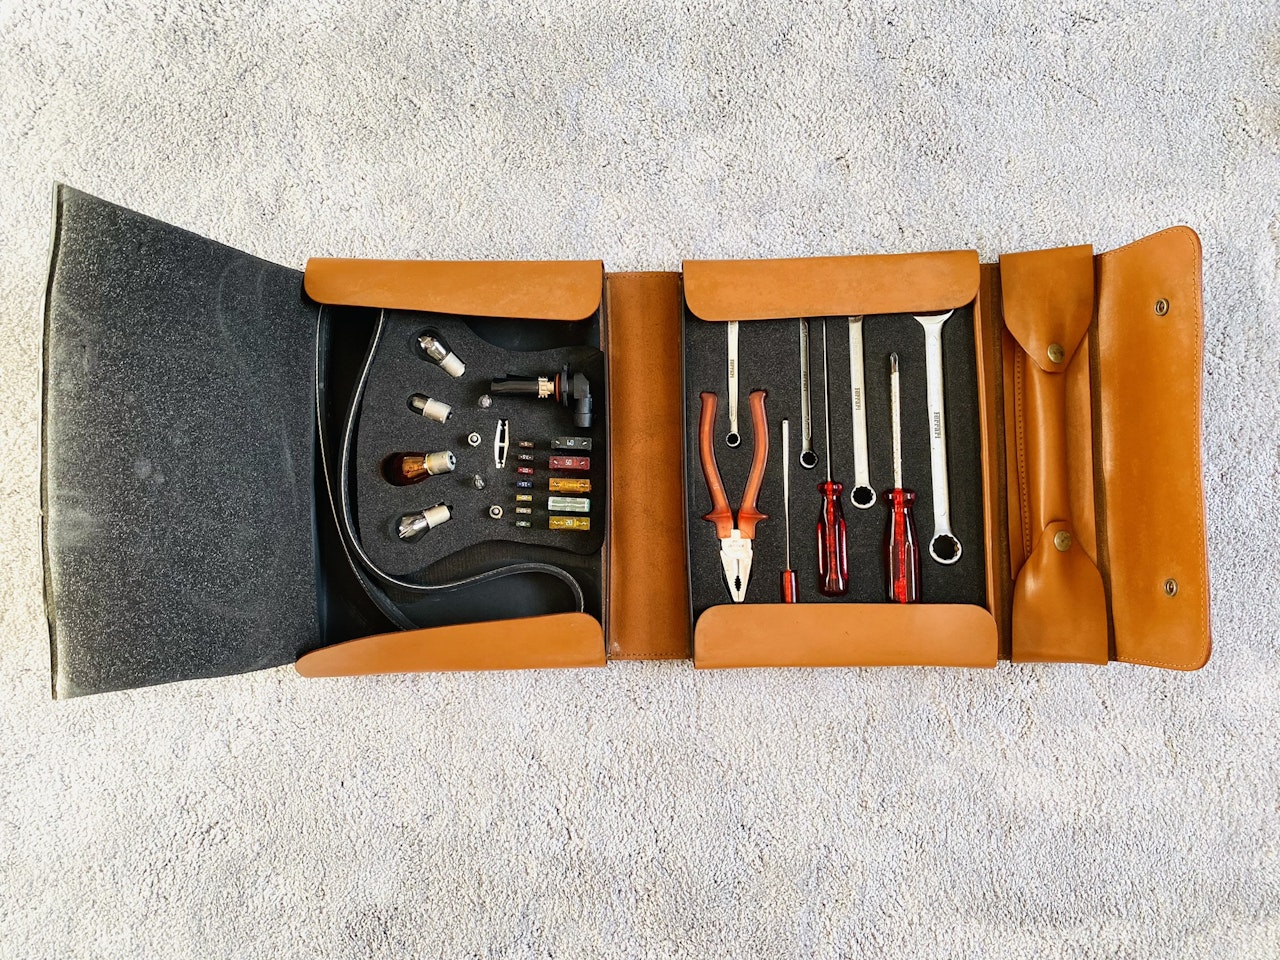 FERRARI 360 / 550 / 575M / 612 TOOL KIT for sale by auction in